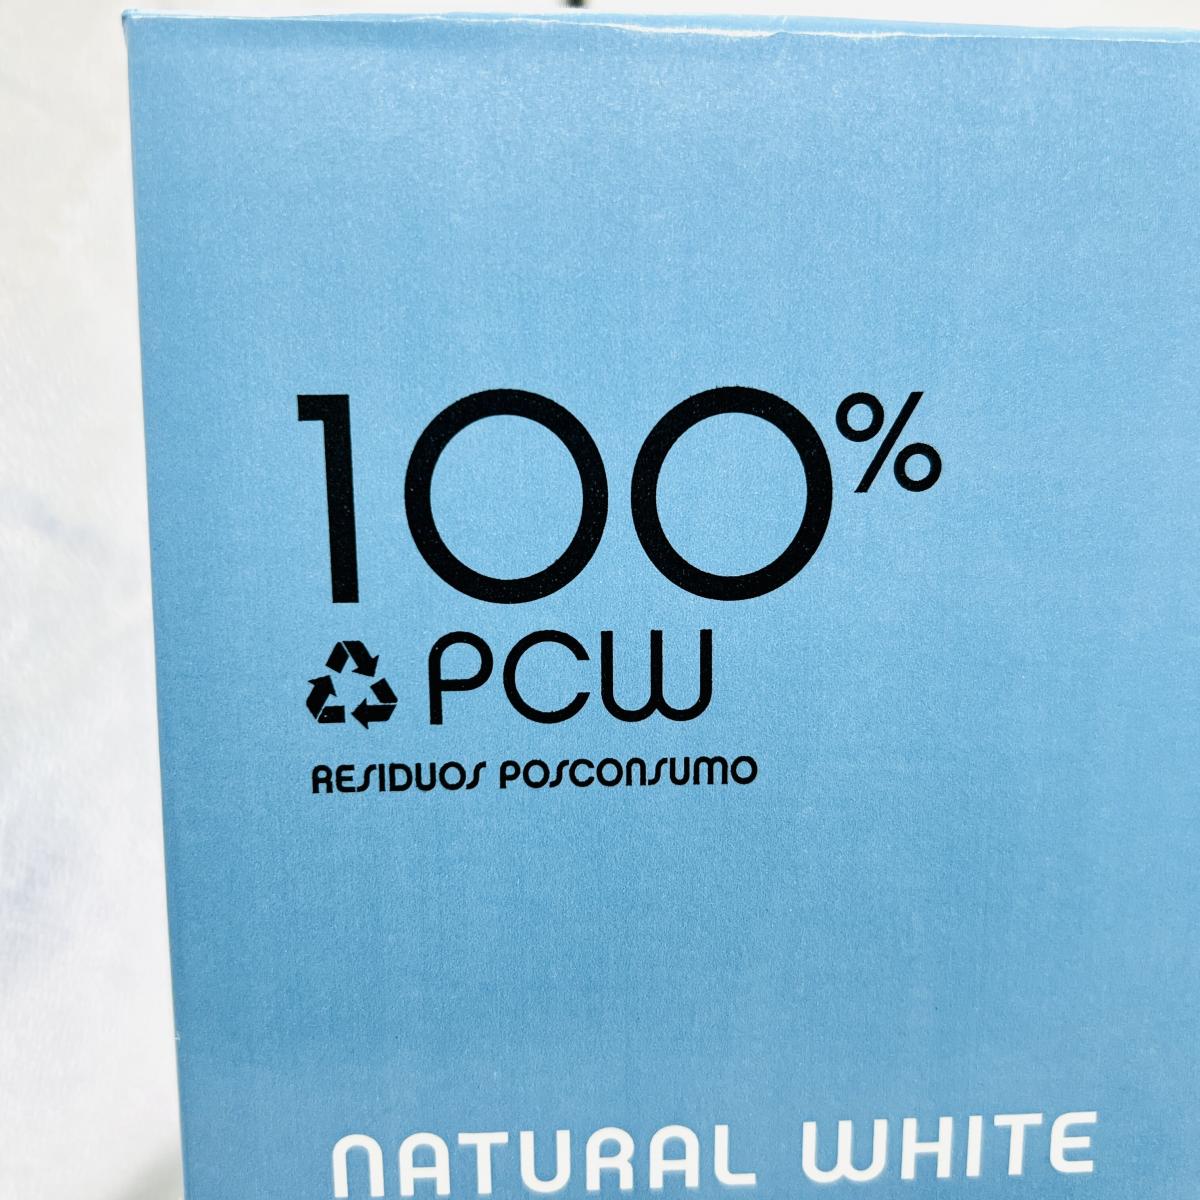 Paperline EyeCare 100% Recycled Copy Paper A4 80gsm White Carton 5 Reams